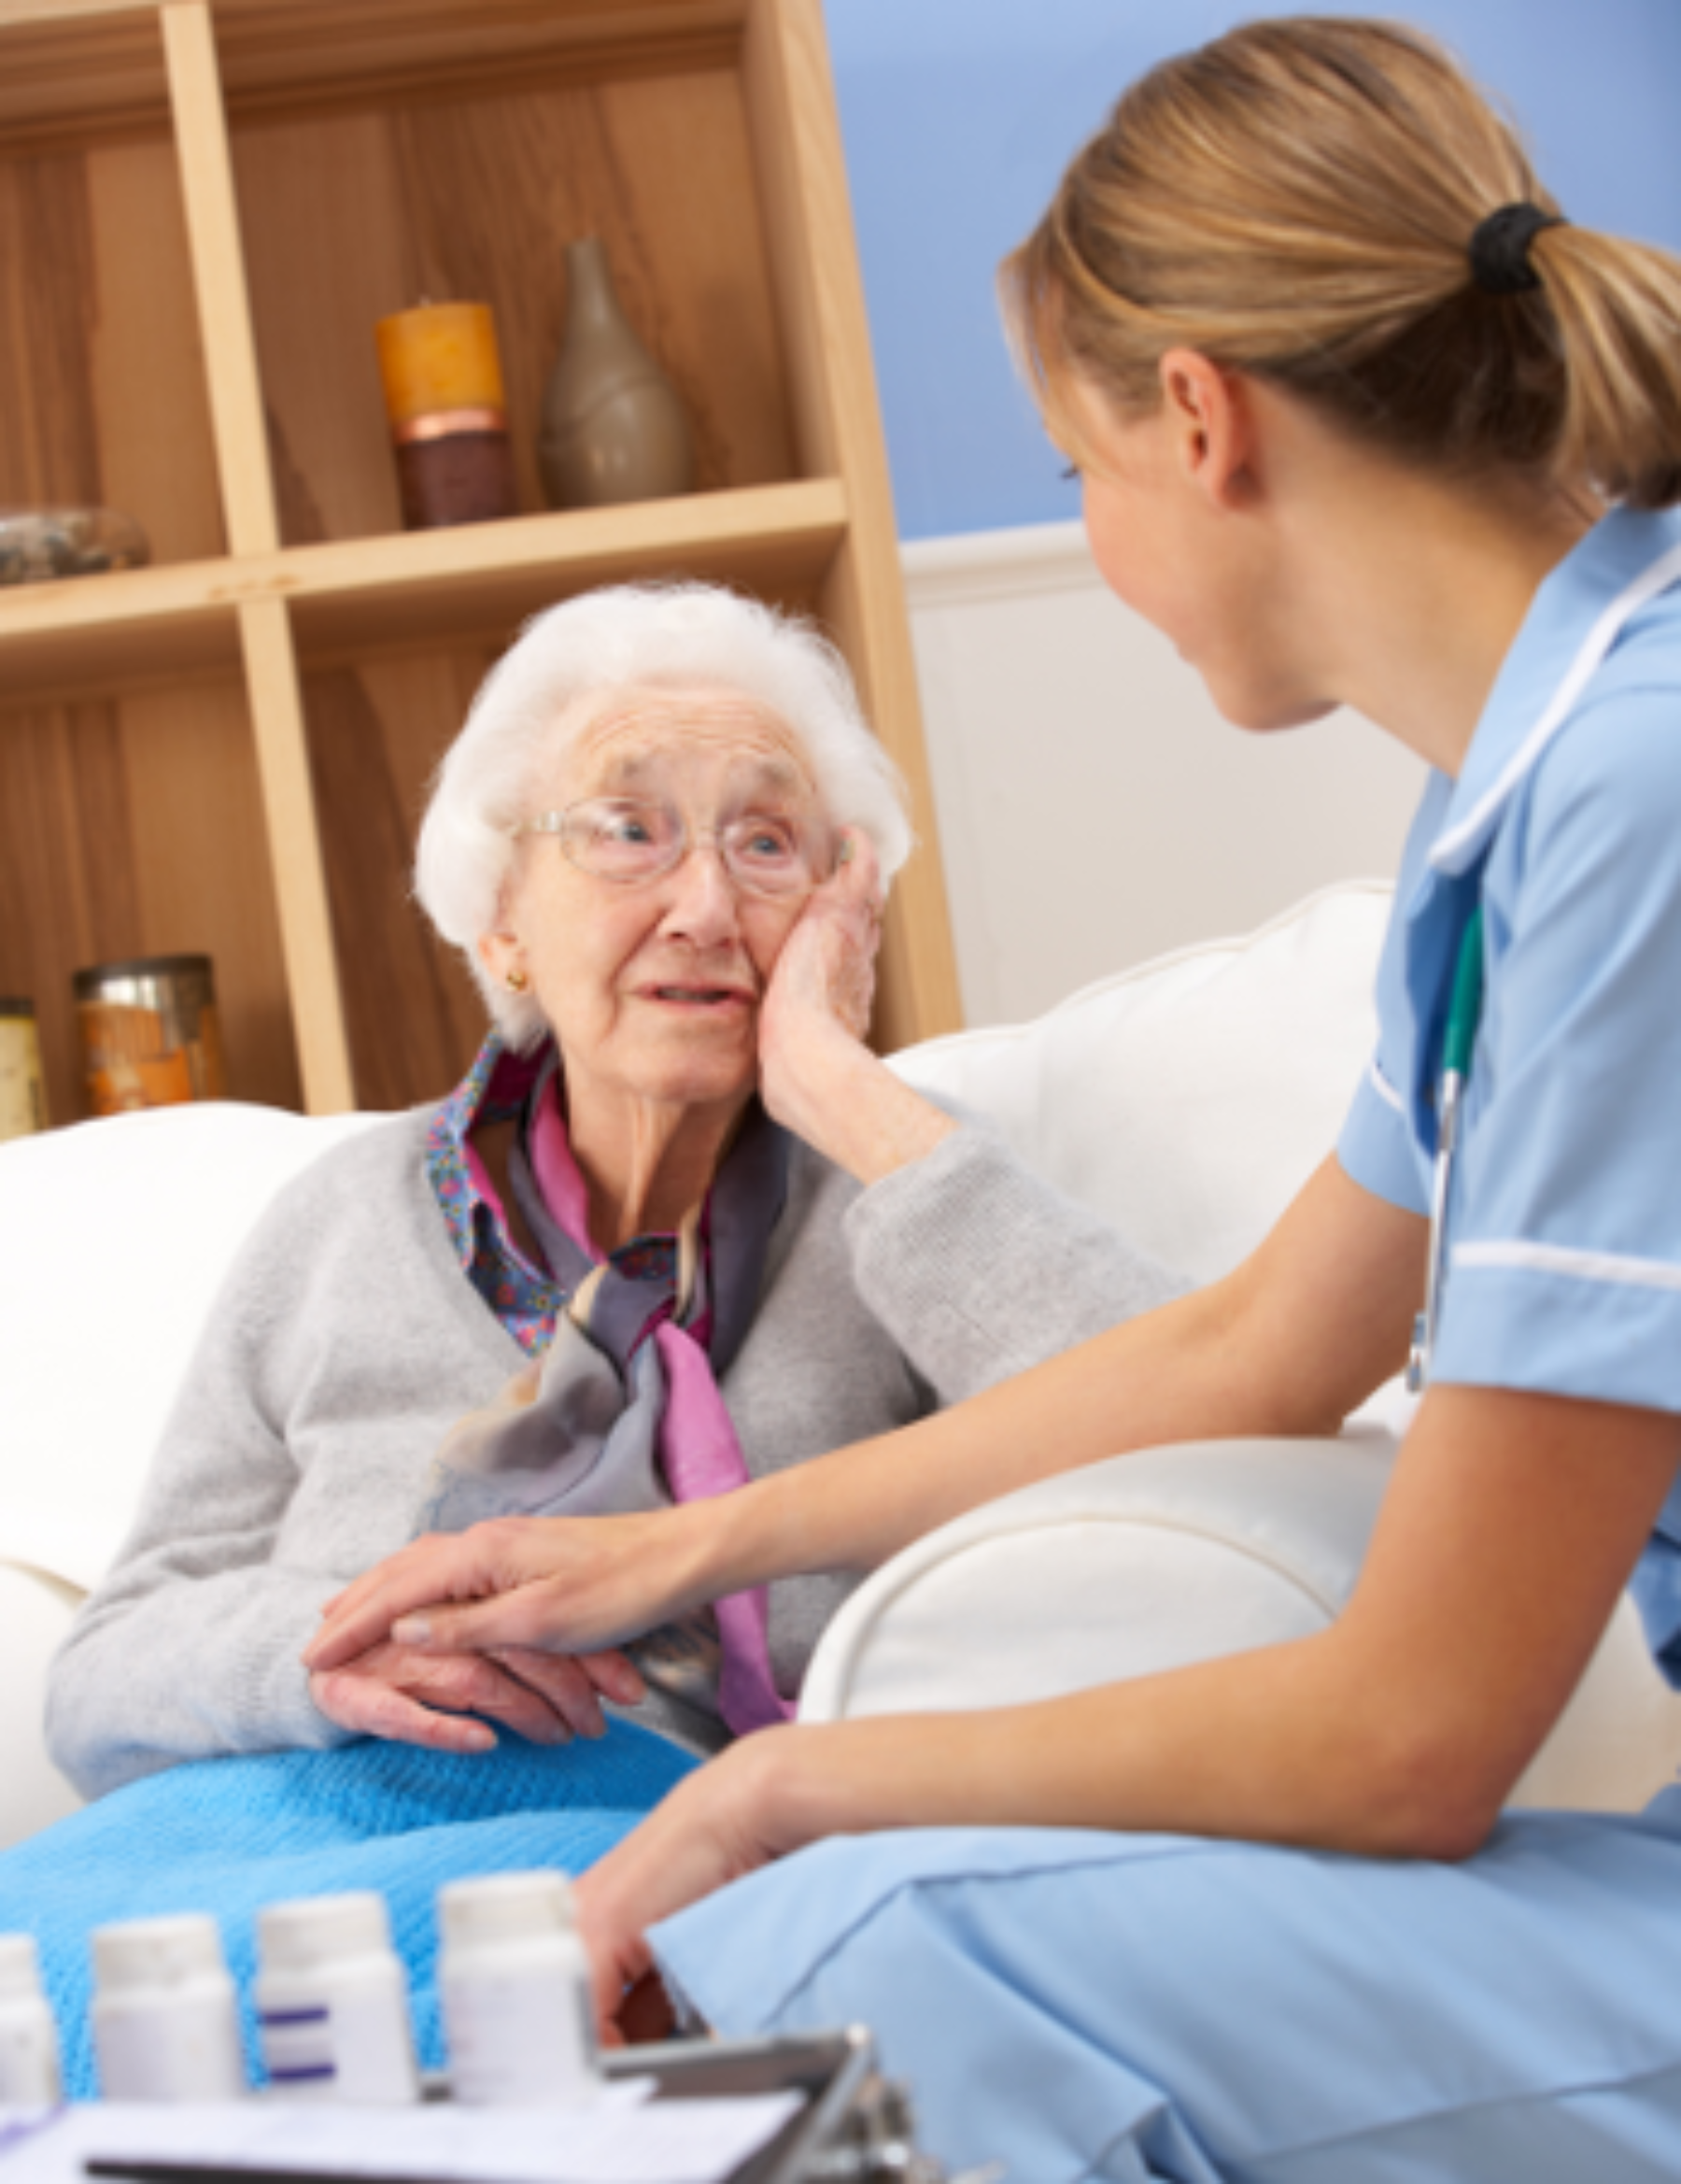 Older adult talking with a healthcare provider.